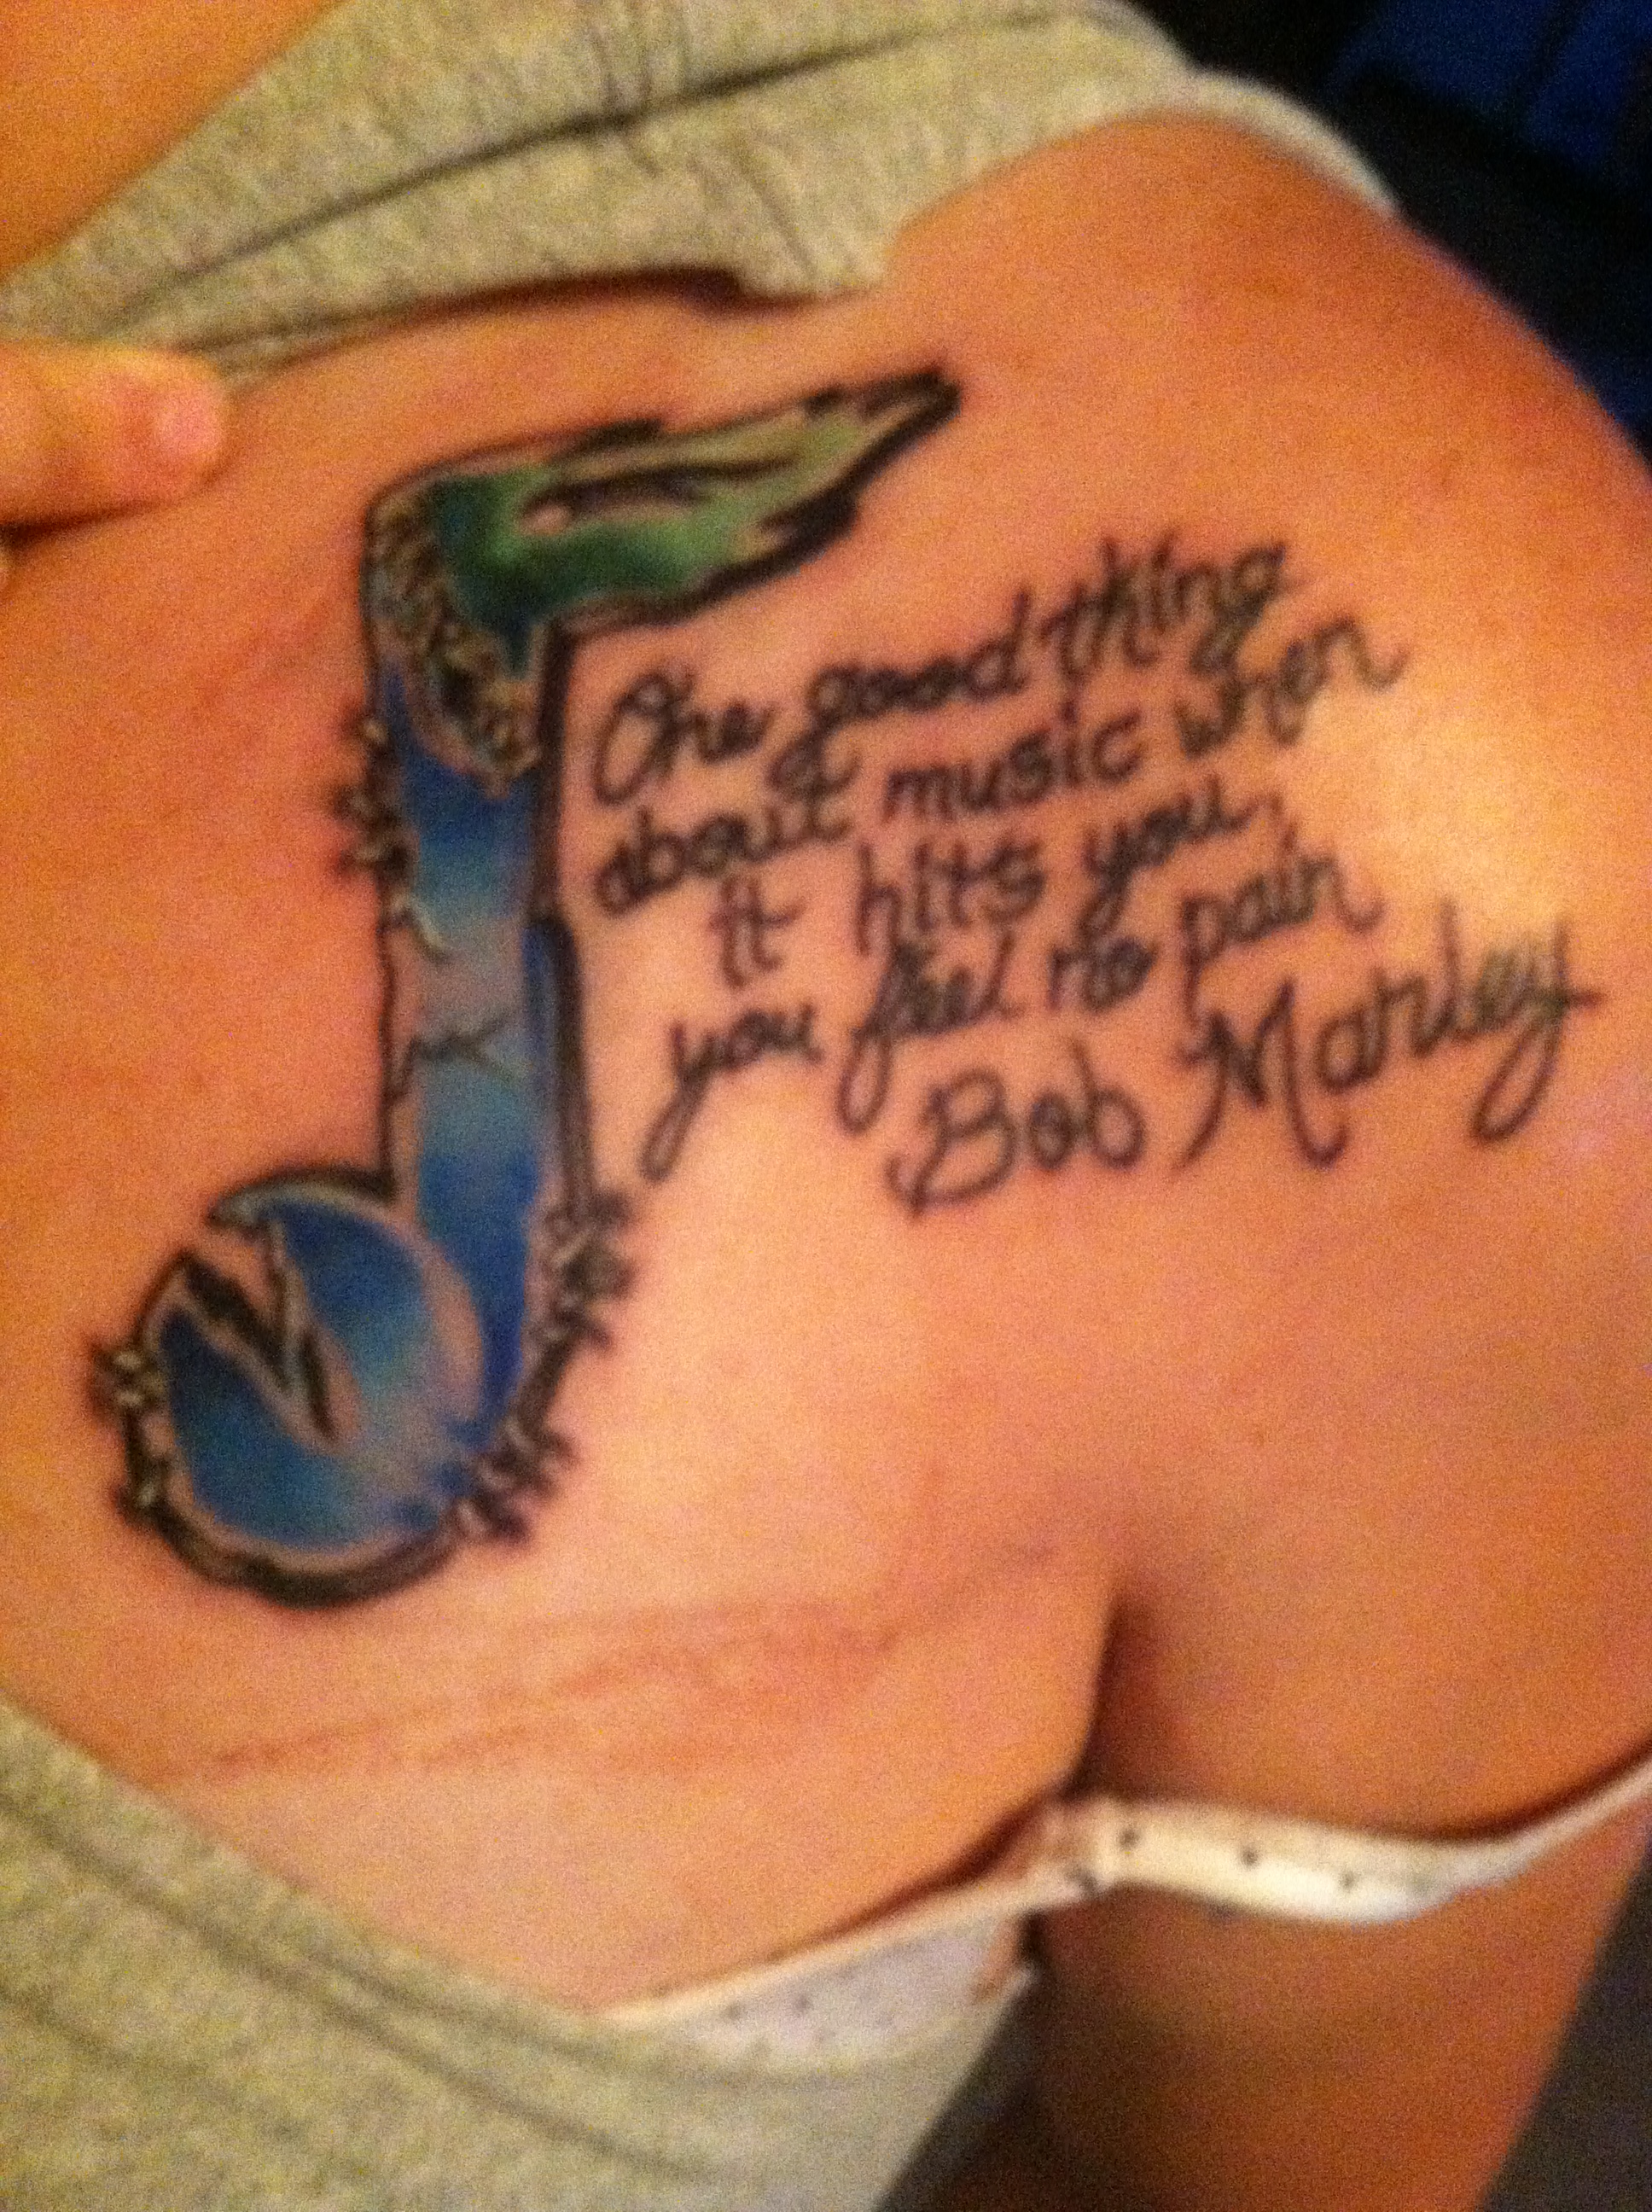 Ugliest Tattoos: Doing it Wrong Indeed - FAIL Blog - Funny Fails